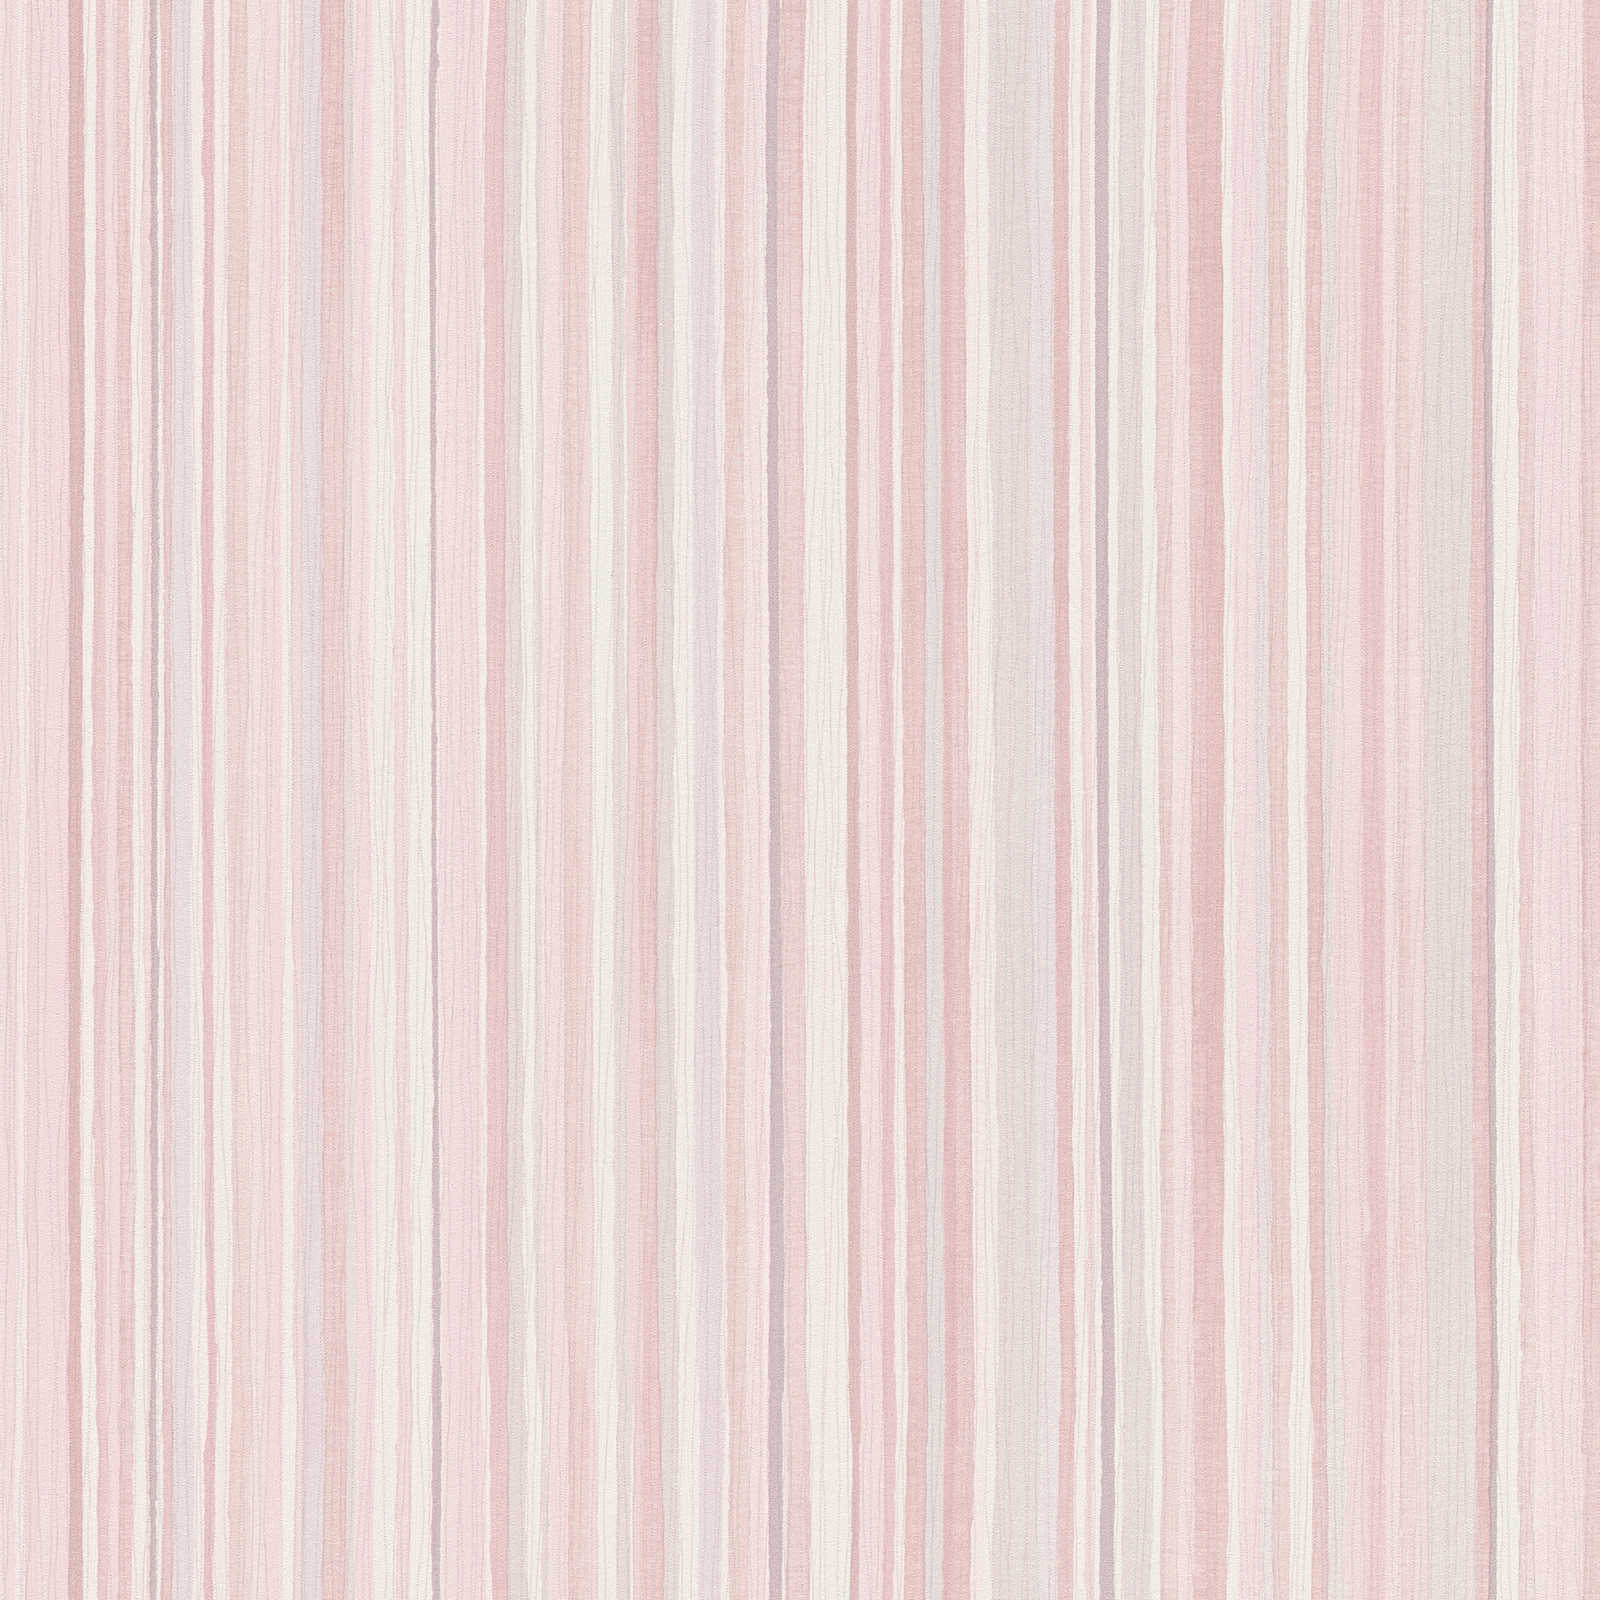 Stripes wallpaper with narrow lines pattern - pink, grey
